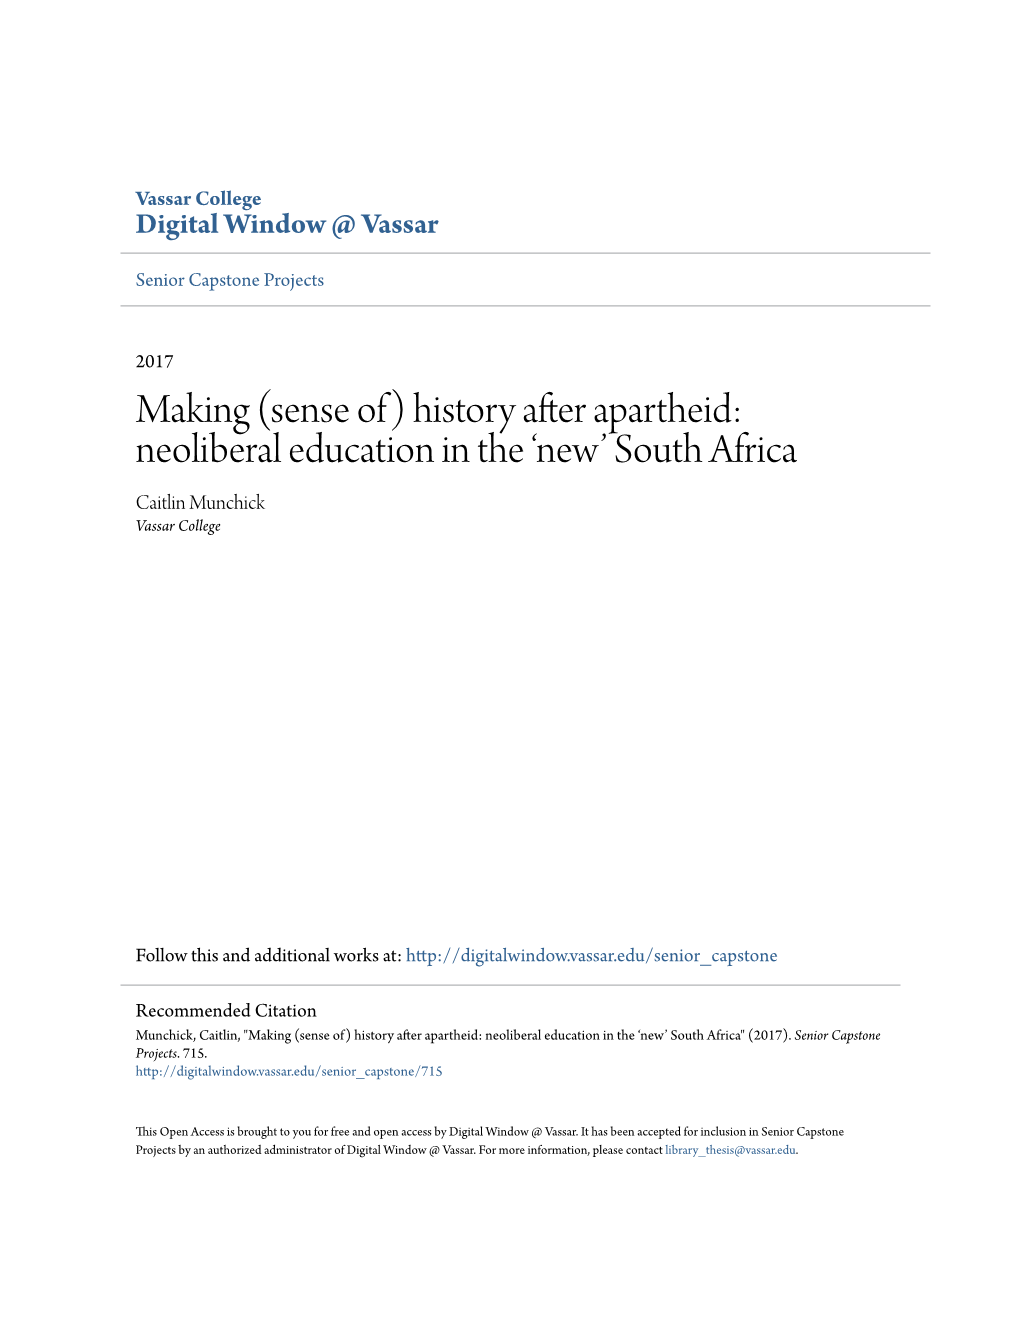 Making (Sense Of) History After Apartheid: Neoliberal Education in the Â•Ÿnewâ•Ž South Africa